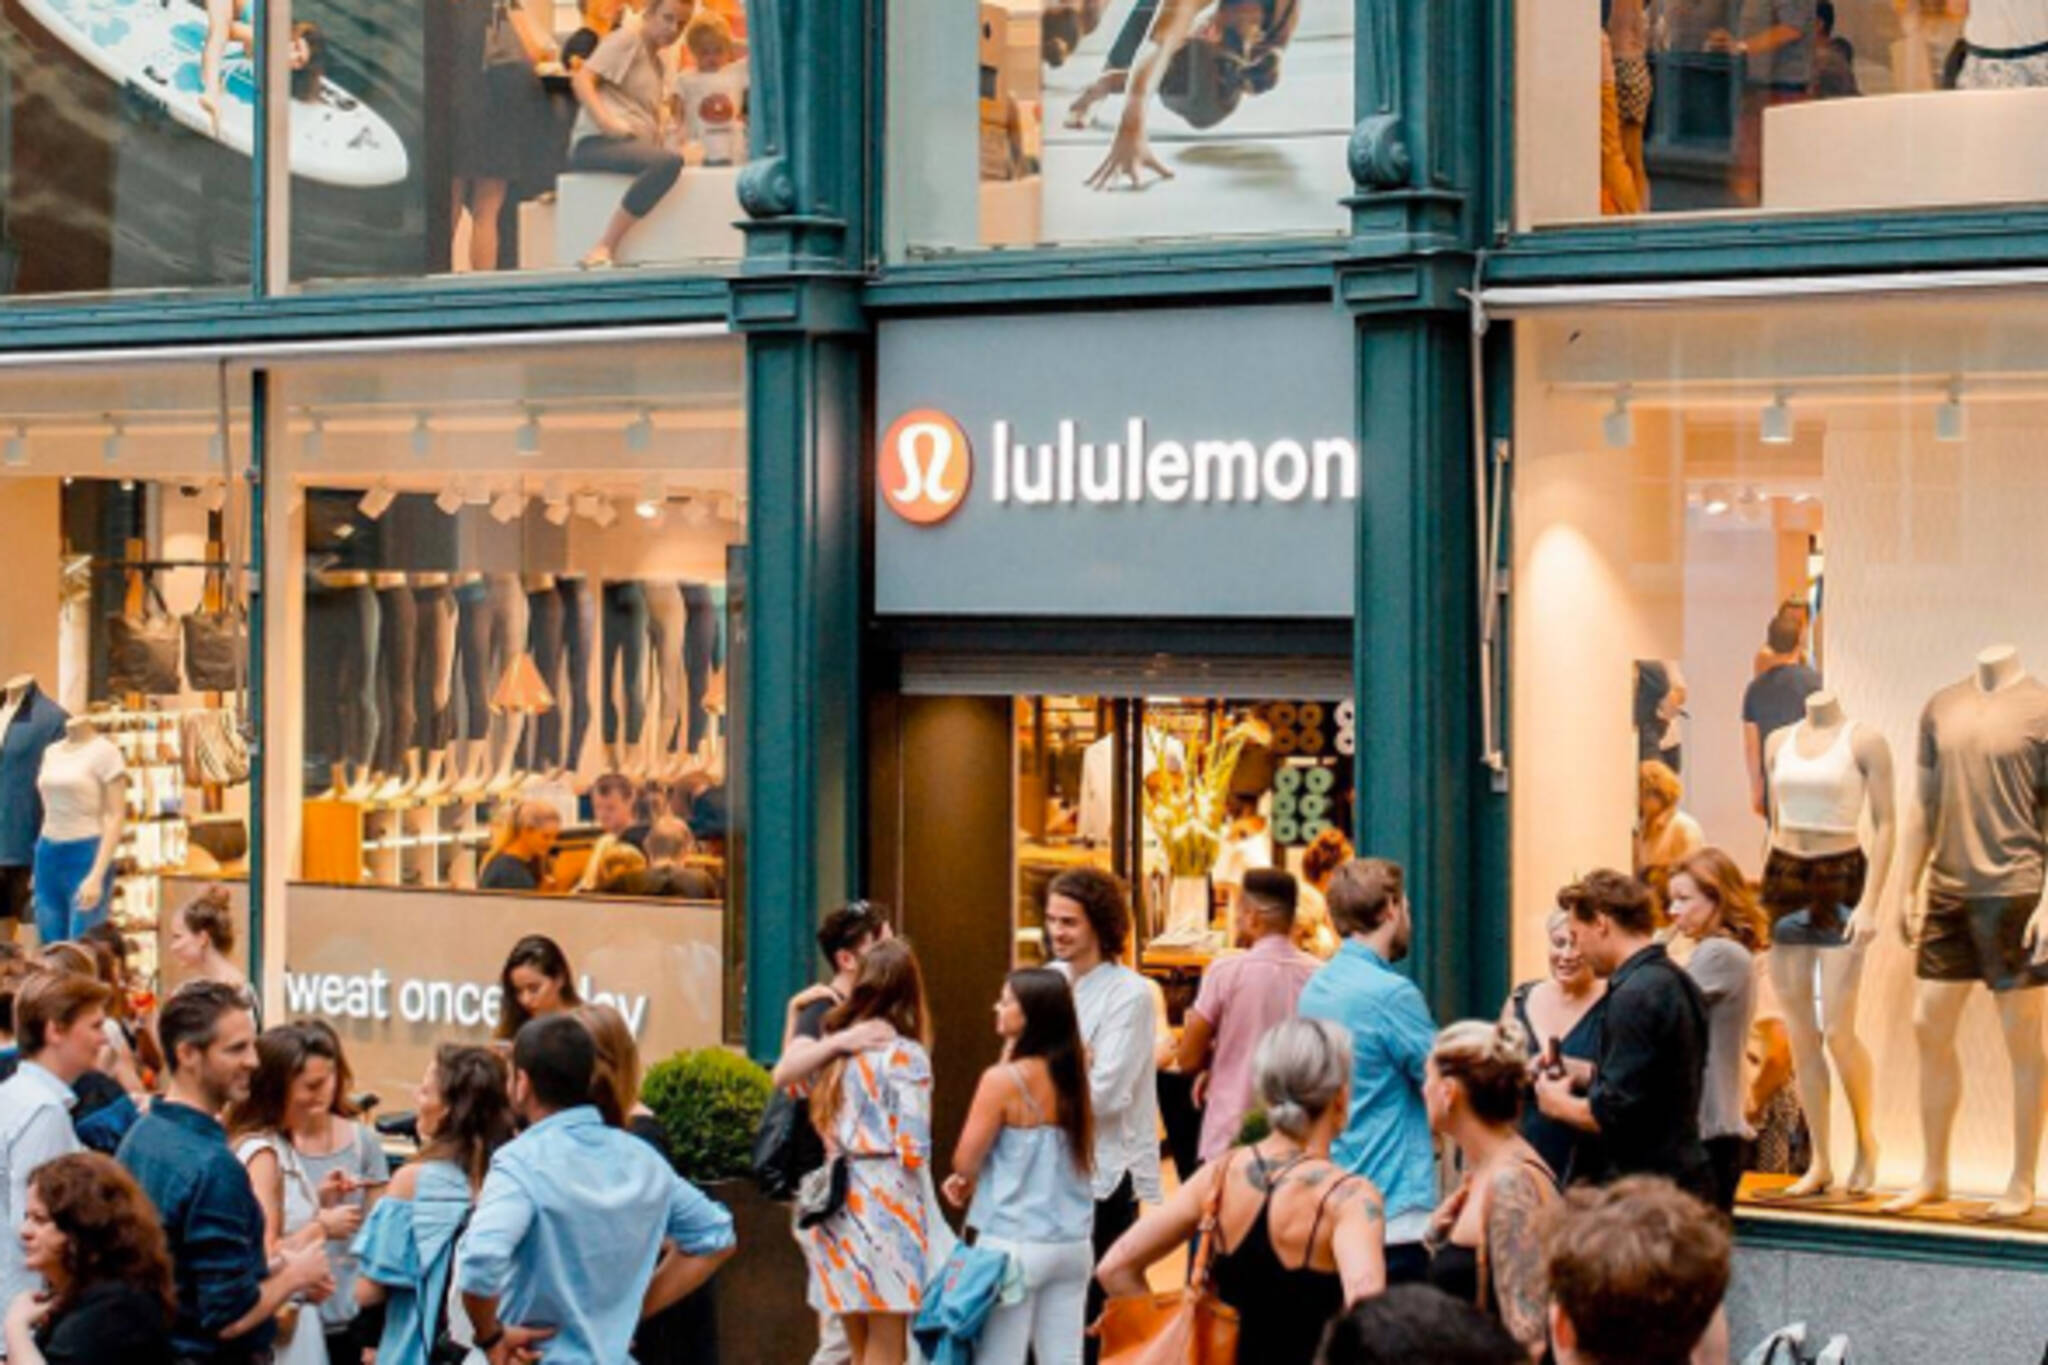 Lululemon makes its retail debut in Spain with its first store in Barcelona